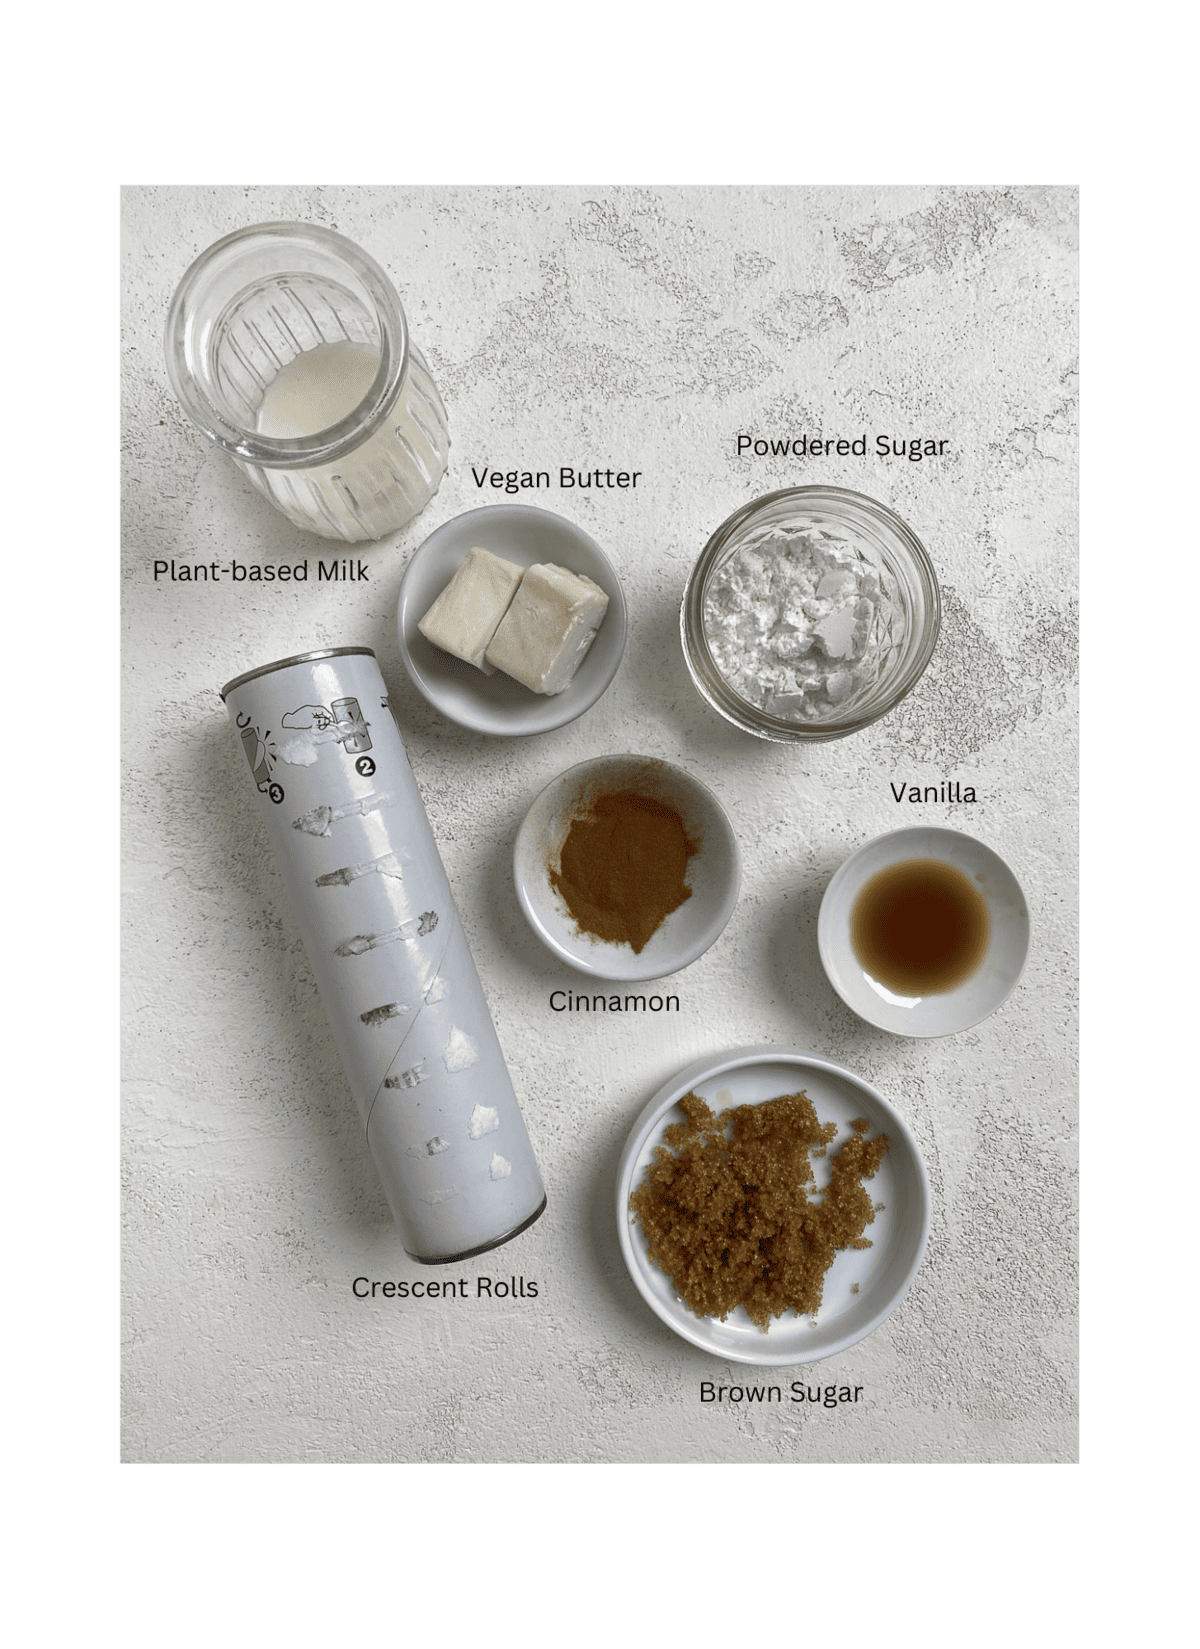 ingredients for Cinnamon Rolls measured out against a white surface